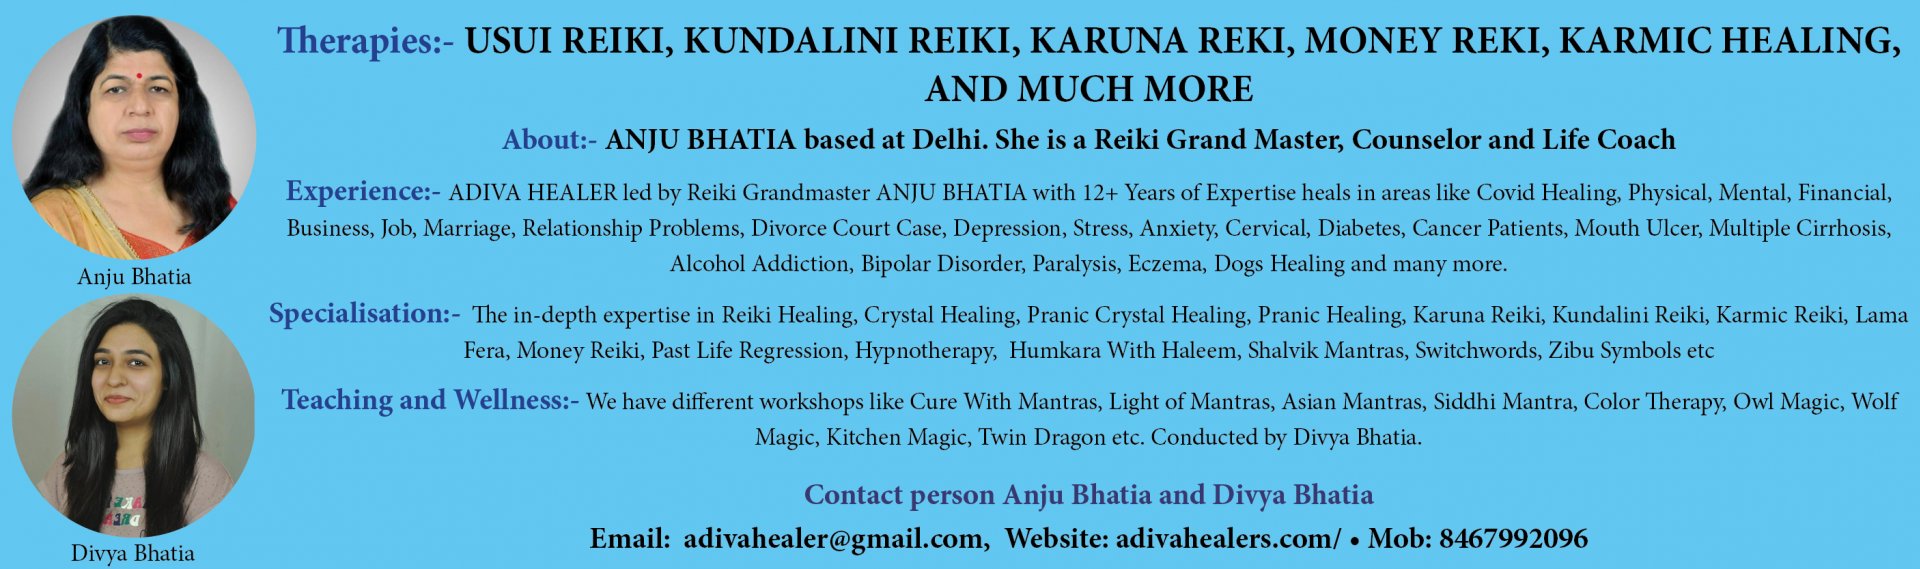 ANJU BHATIA based at Delhi. She is a Reiki Grand Master, Counselor and Life Coach